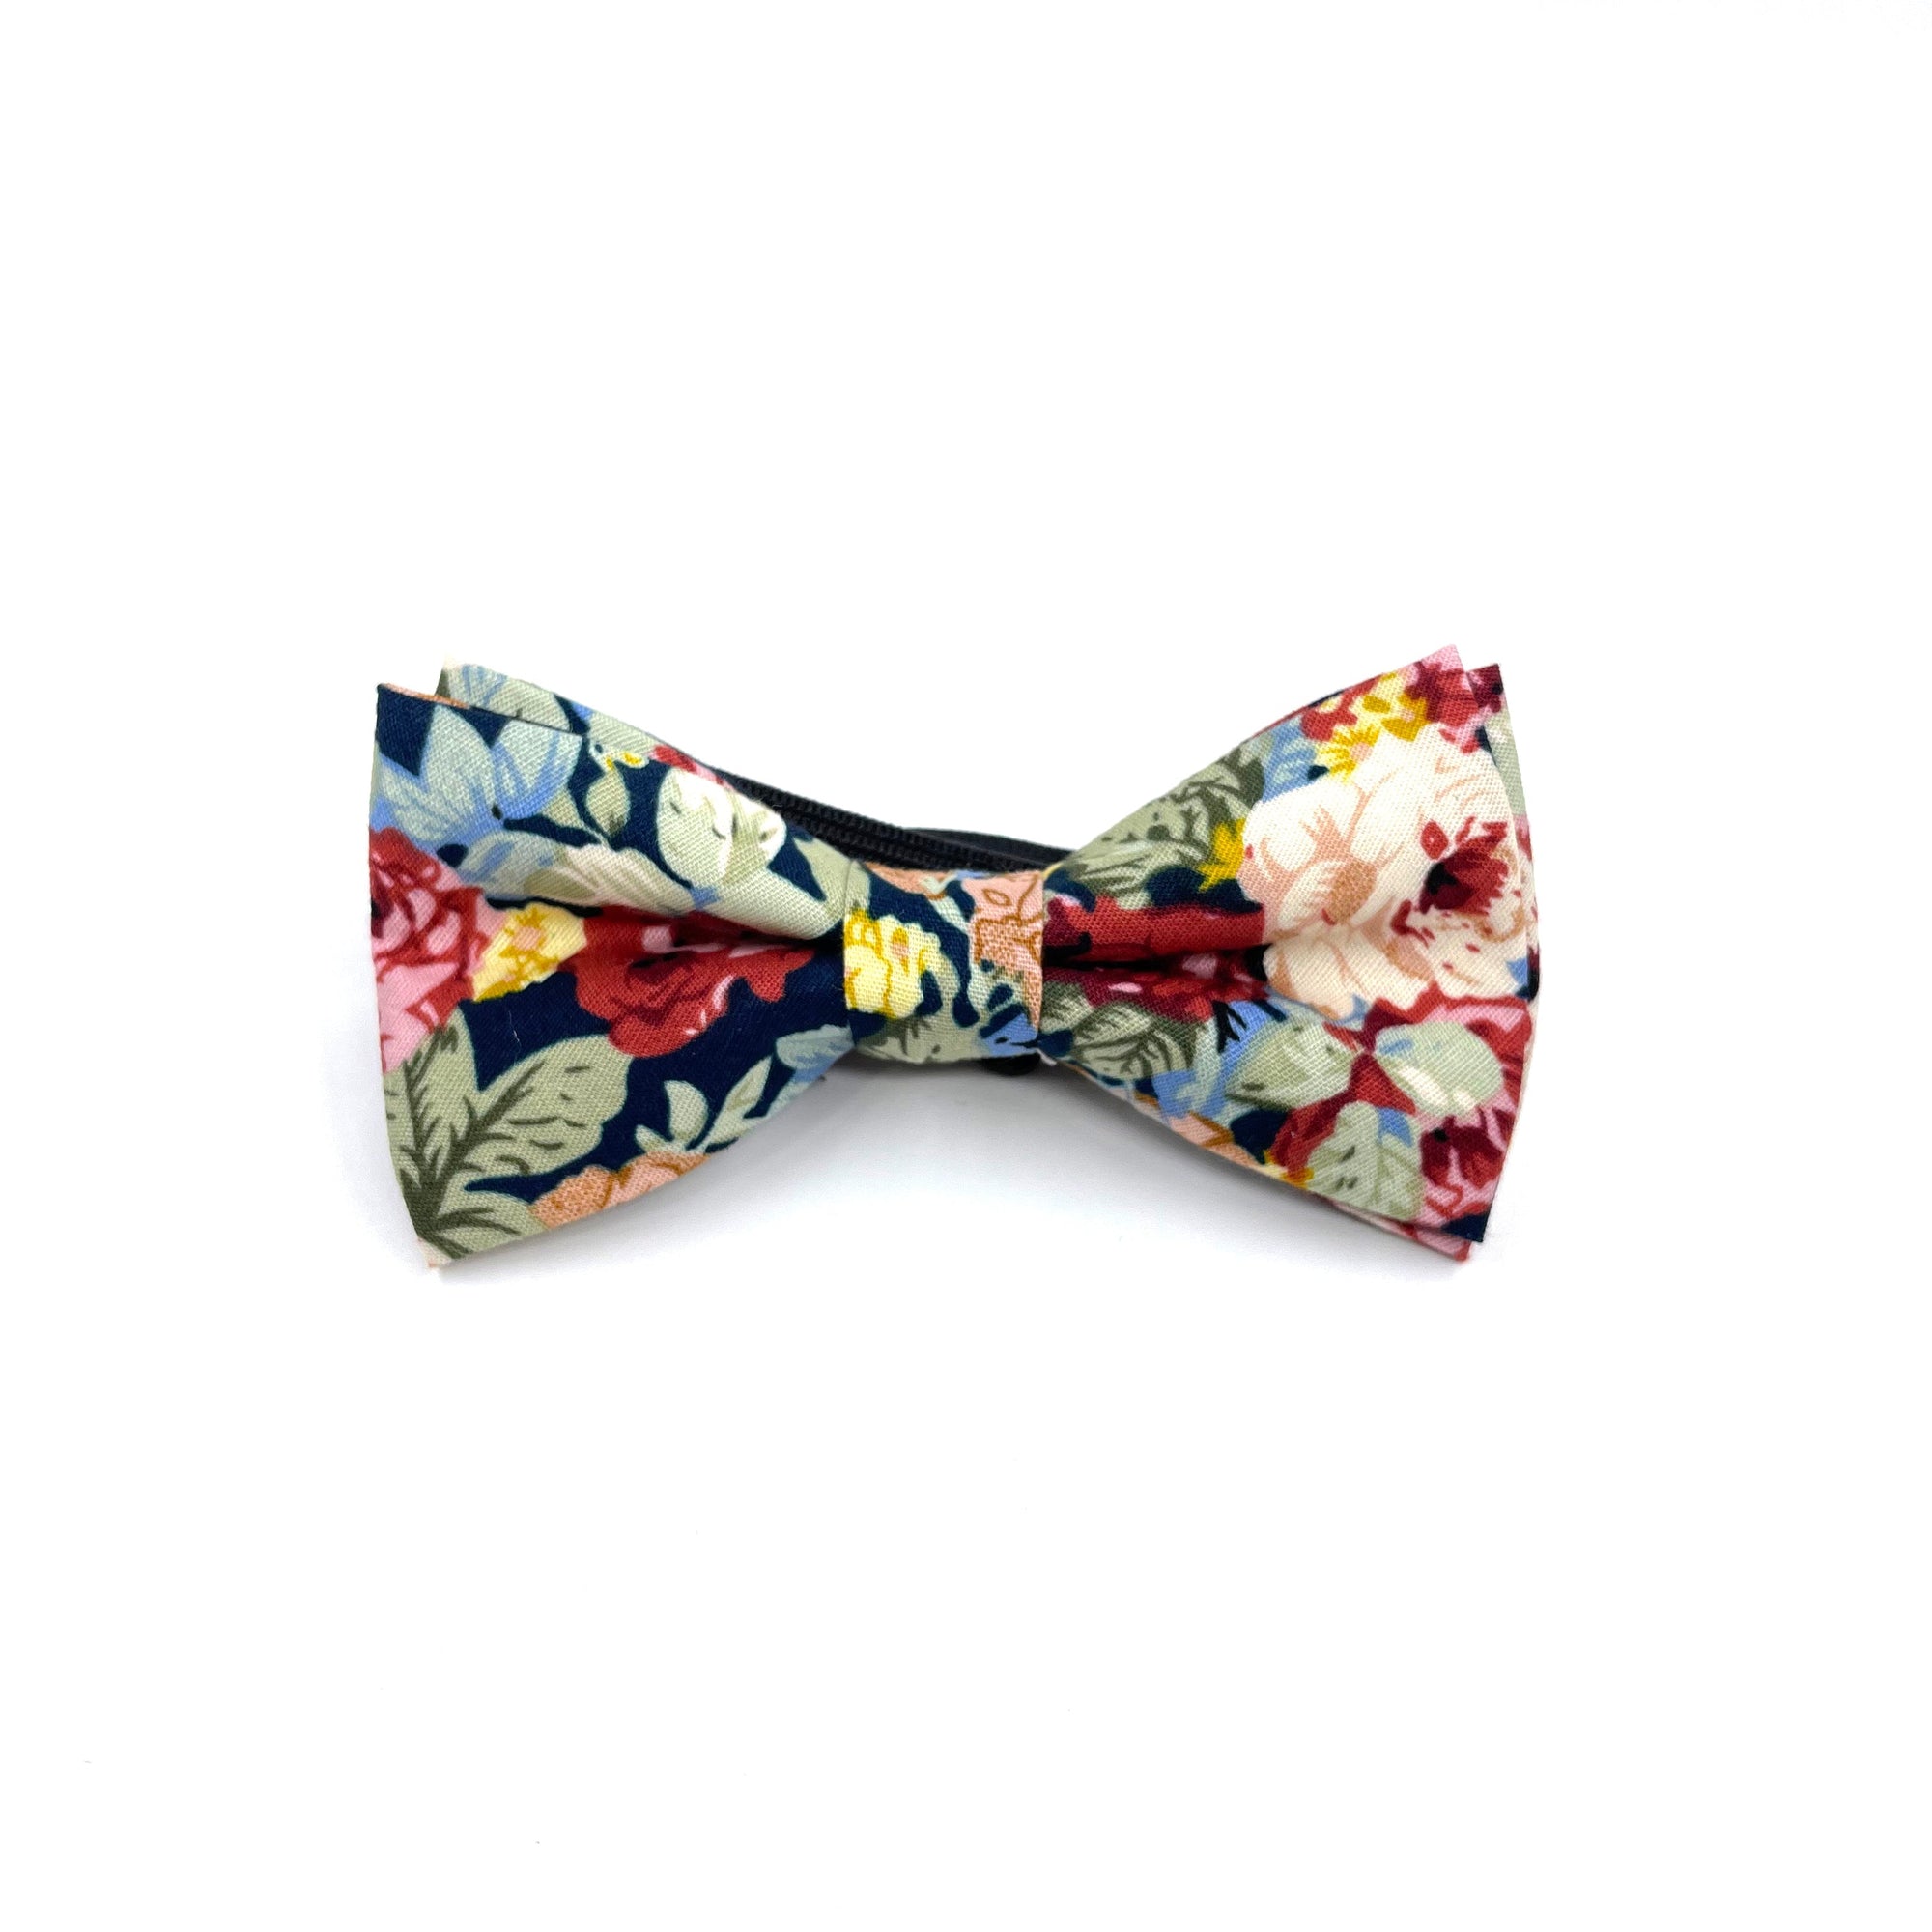 Blue Kids Floral Bow Tie (Pretied) by Mytieshop - EVANDER-Blue Kids Floral Bow Tie Color: blue Strap is adjustablePre-Tied bowtieBow Tie 10.5 * 6CMFor toddlers ages 0- Great for Prom Dinners Interviews Photo shoots Photo sessions Dates Wedding Attendant Ring Bearers Evander Kids Floral Bow tie for kids. Fits toddlers and babies. Evabder baby ow tie toddler bow tie floral for wedding and events groom groomsmen flower bow tie mytieshop ring bearer page boy bow tie white bow tie white and blue tie 